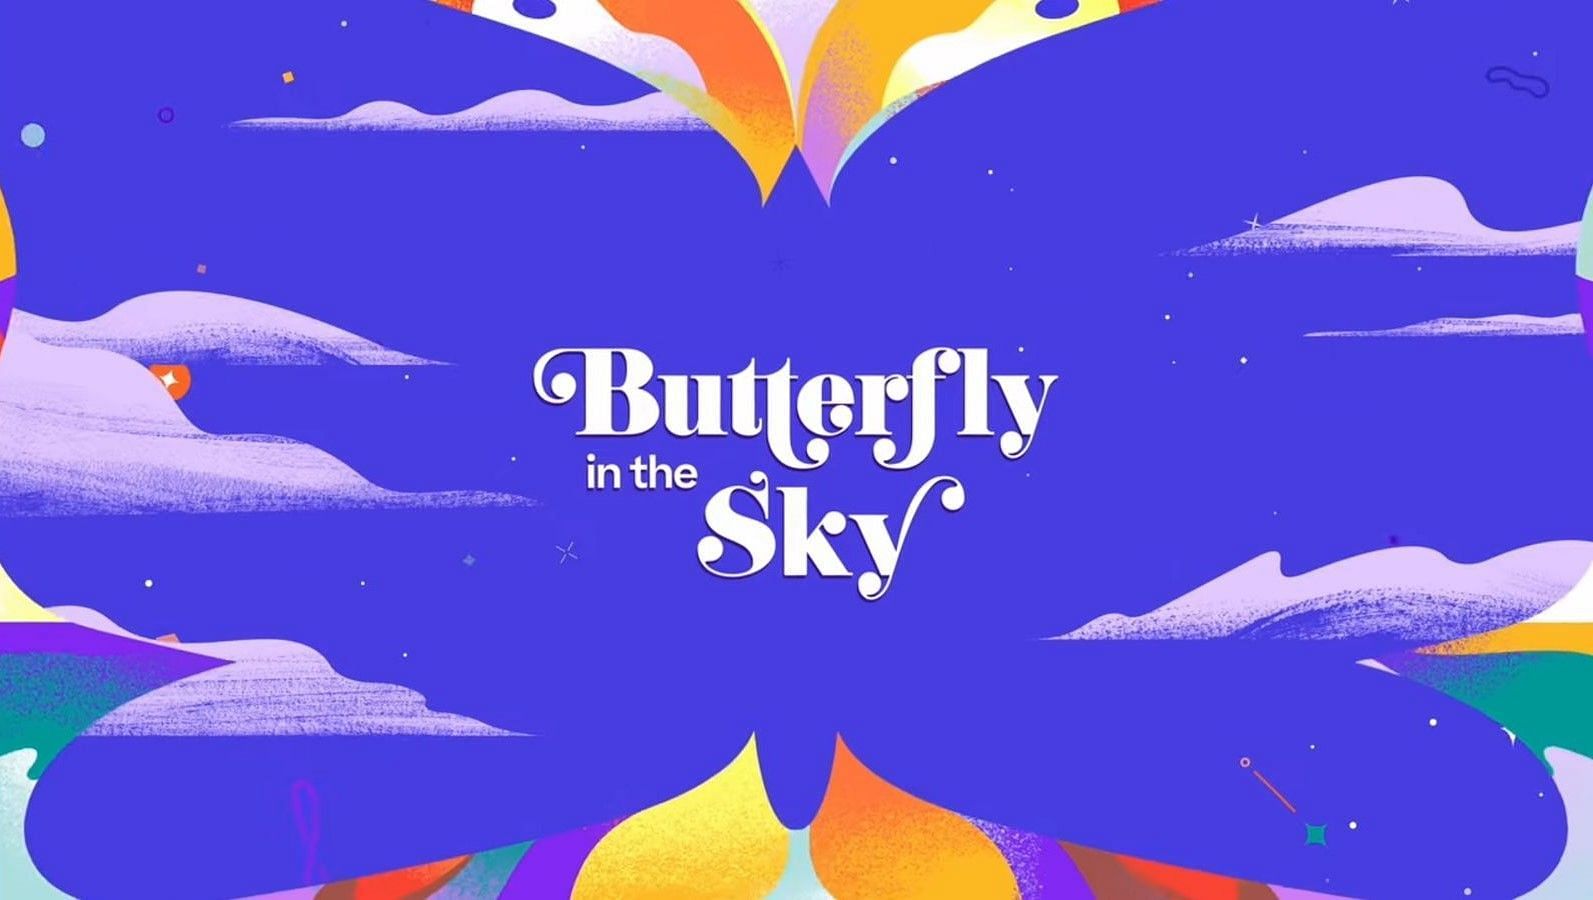 Butterfly in the Sky (Image by IGN)